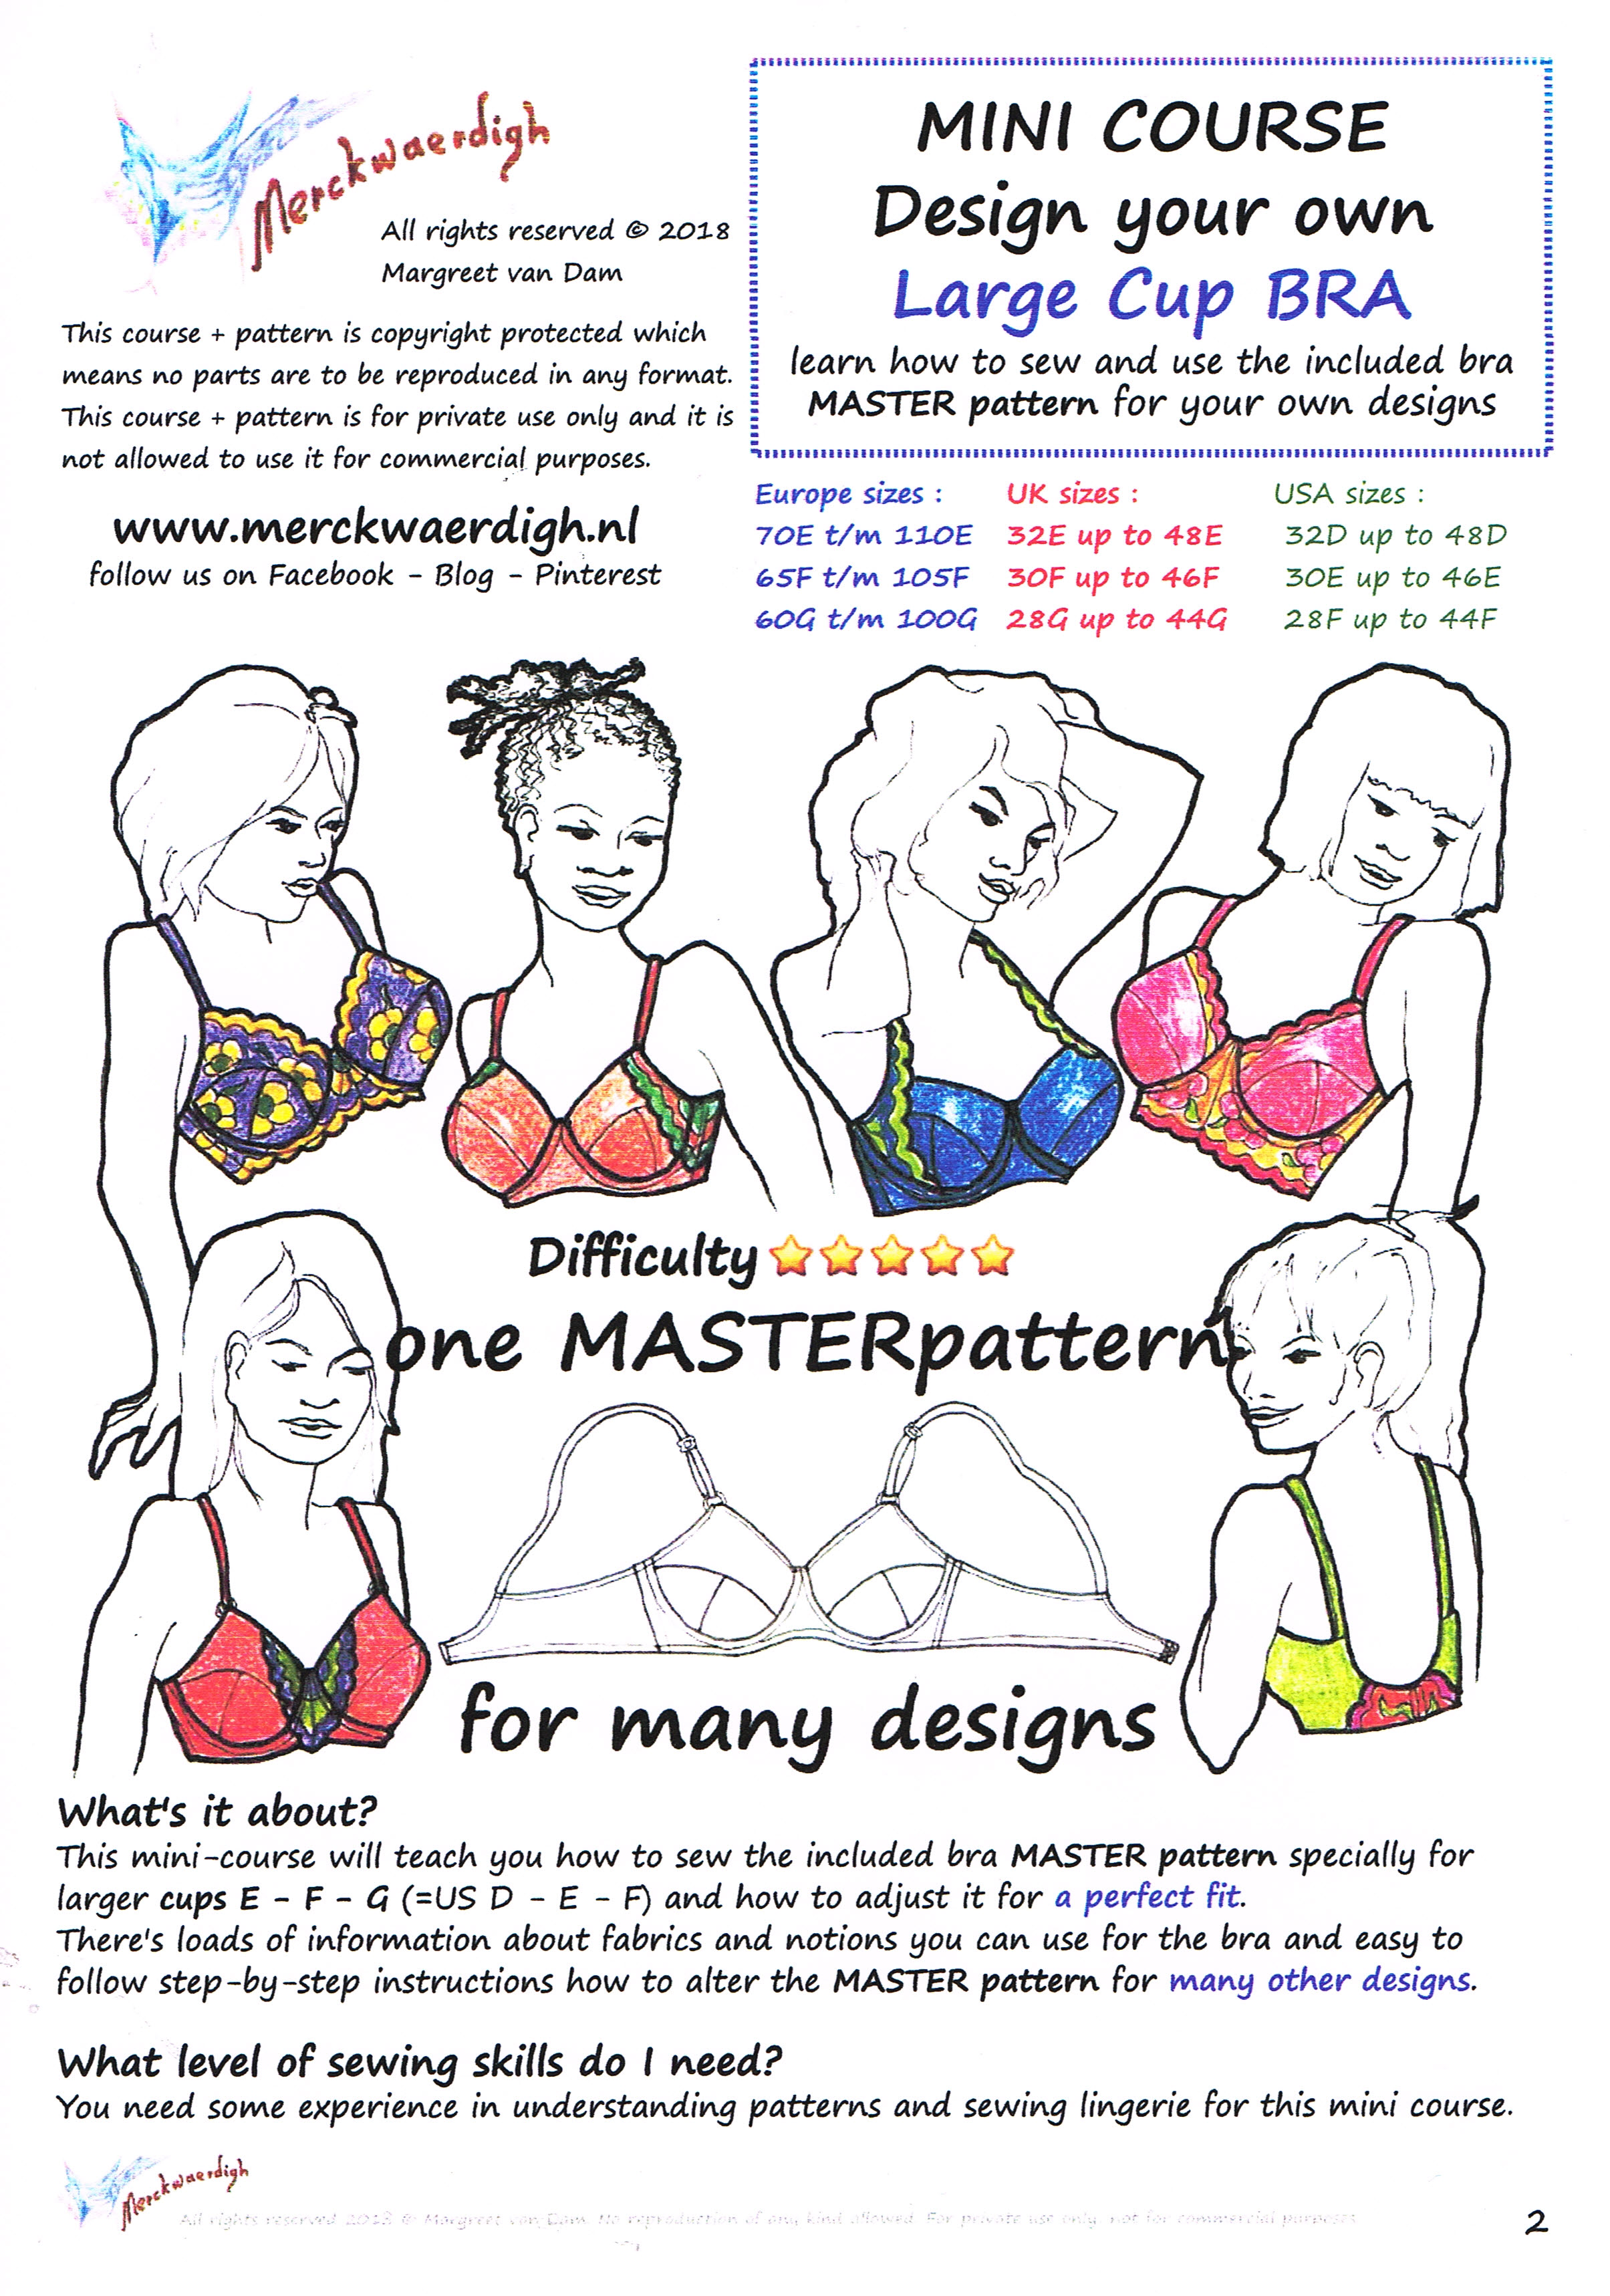 How to use the Merckwaerdigh Mini-Course for Bras with Large Cups